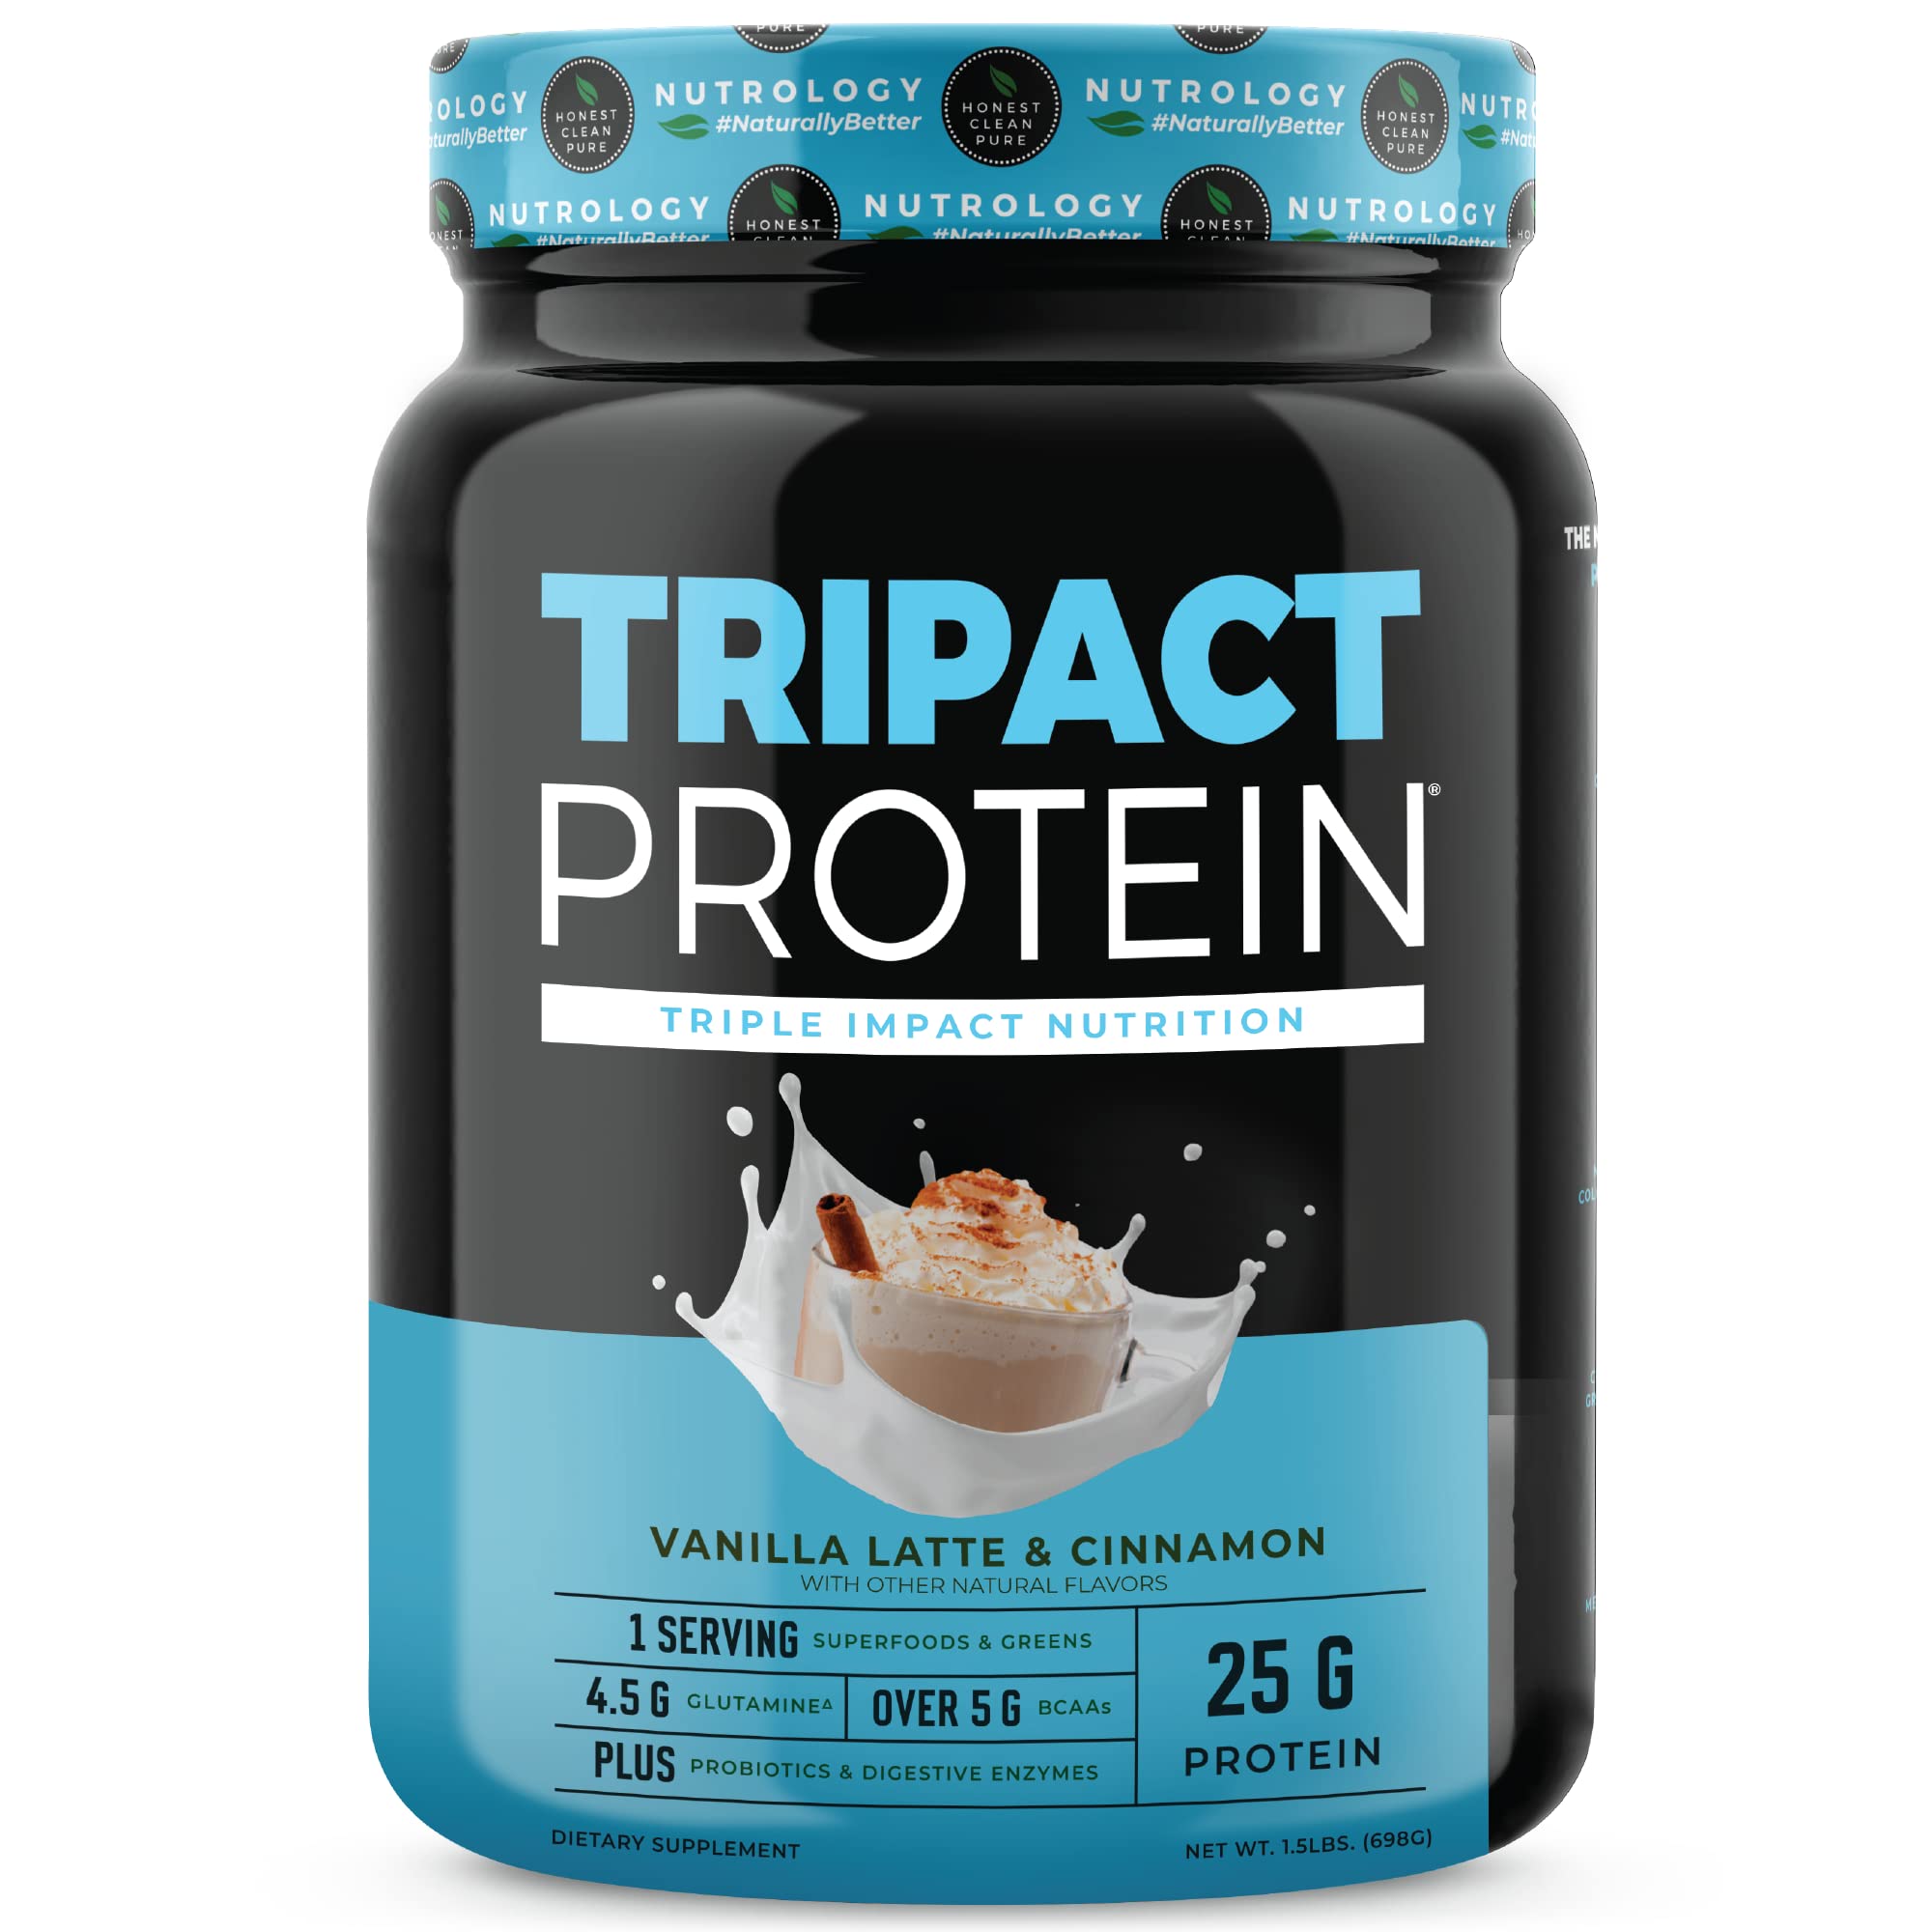 TRIPACT Protein - Premium Nutrition Shake - Non-GMO Grass Fed Whey Protein, Plant Proteins, Greens, Superfoods & Probiotics–Lean Muscle-Recovery-Bo...